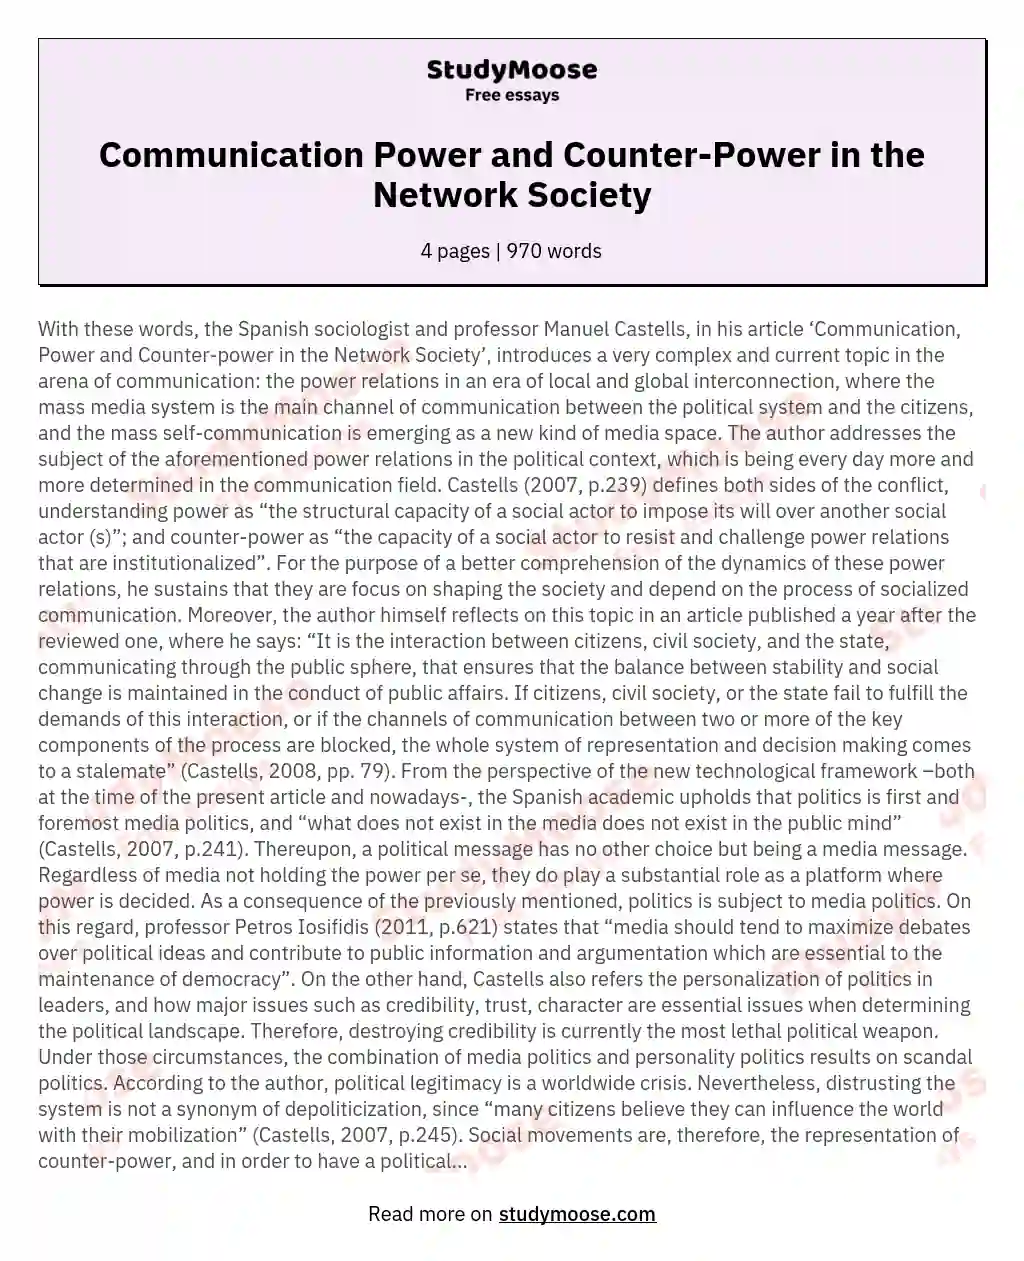 Communication Power and Counter-Power in the Network Society essay